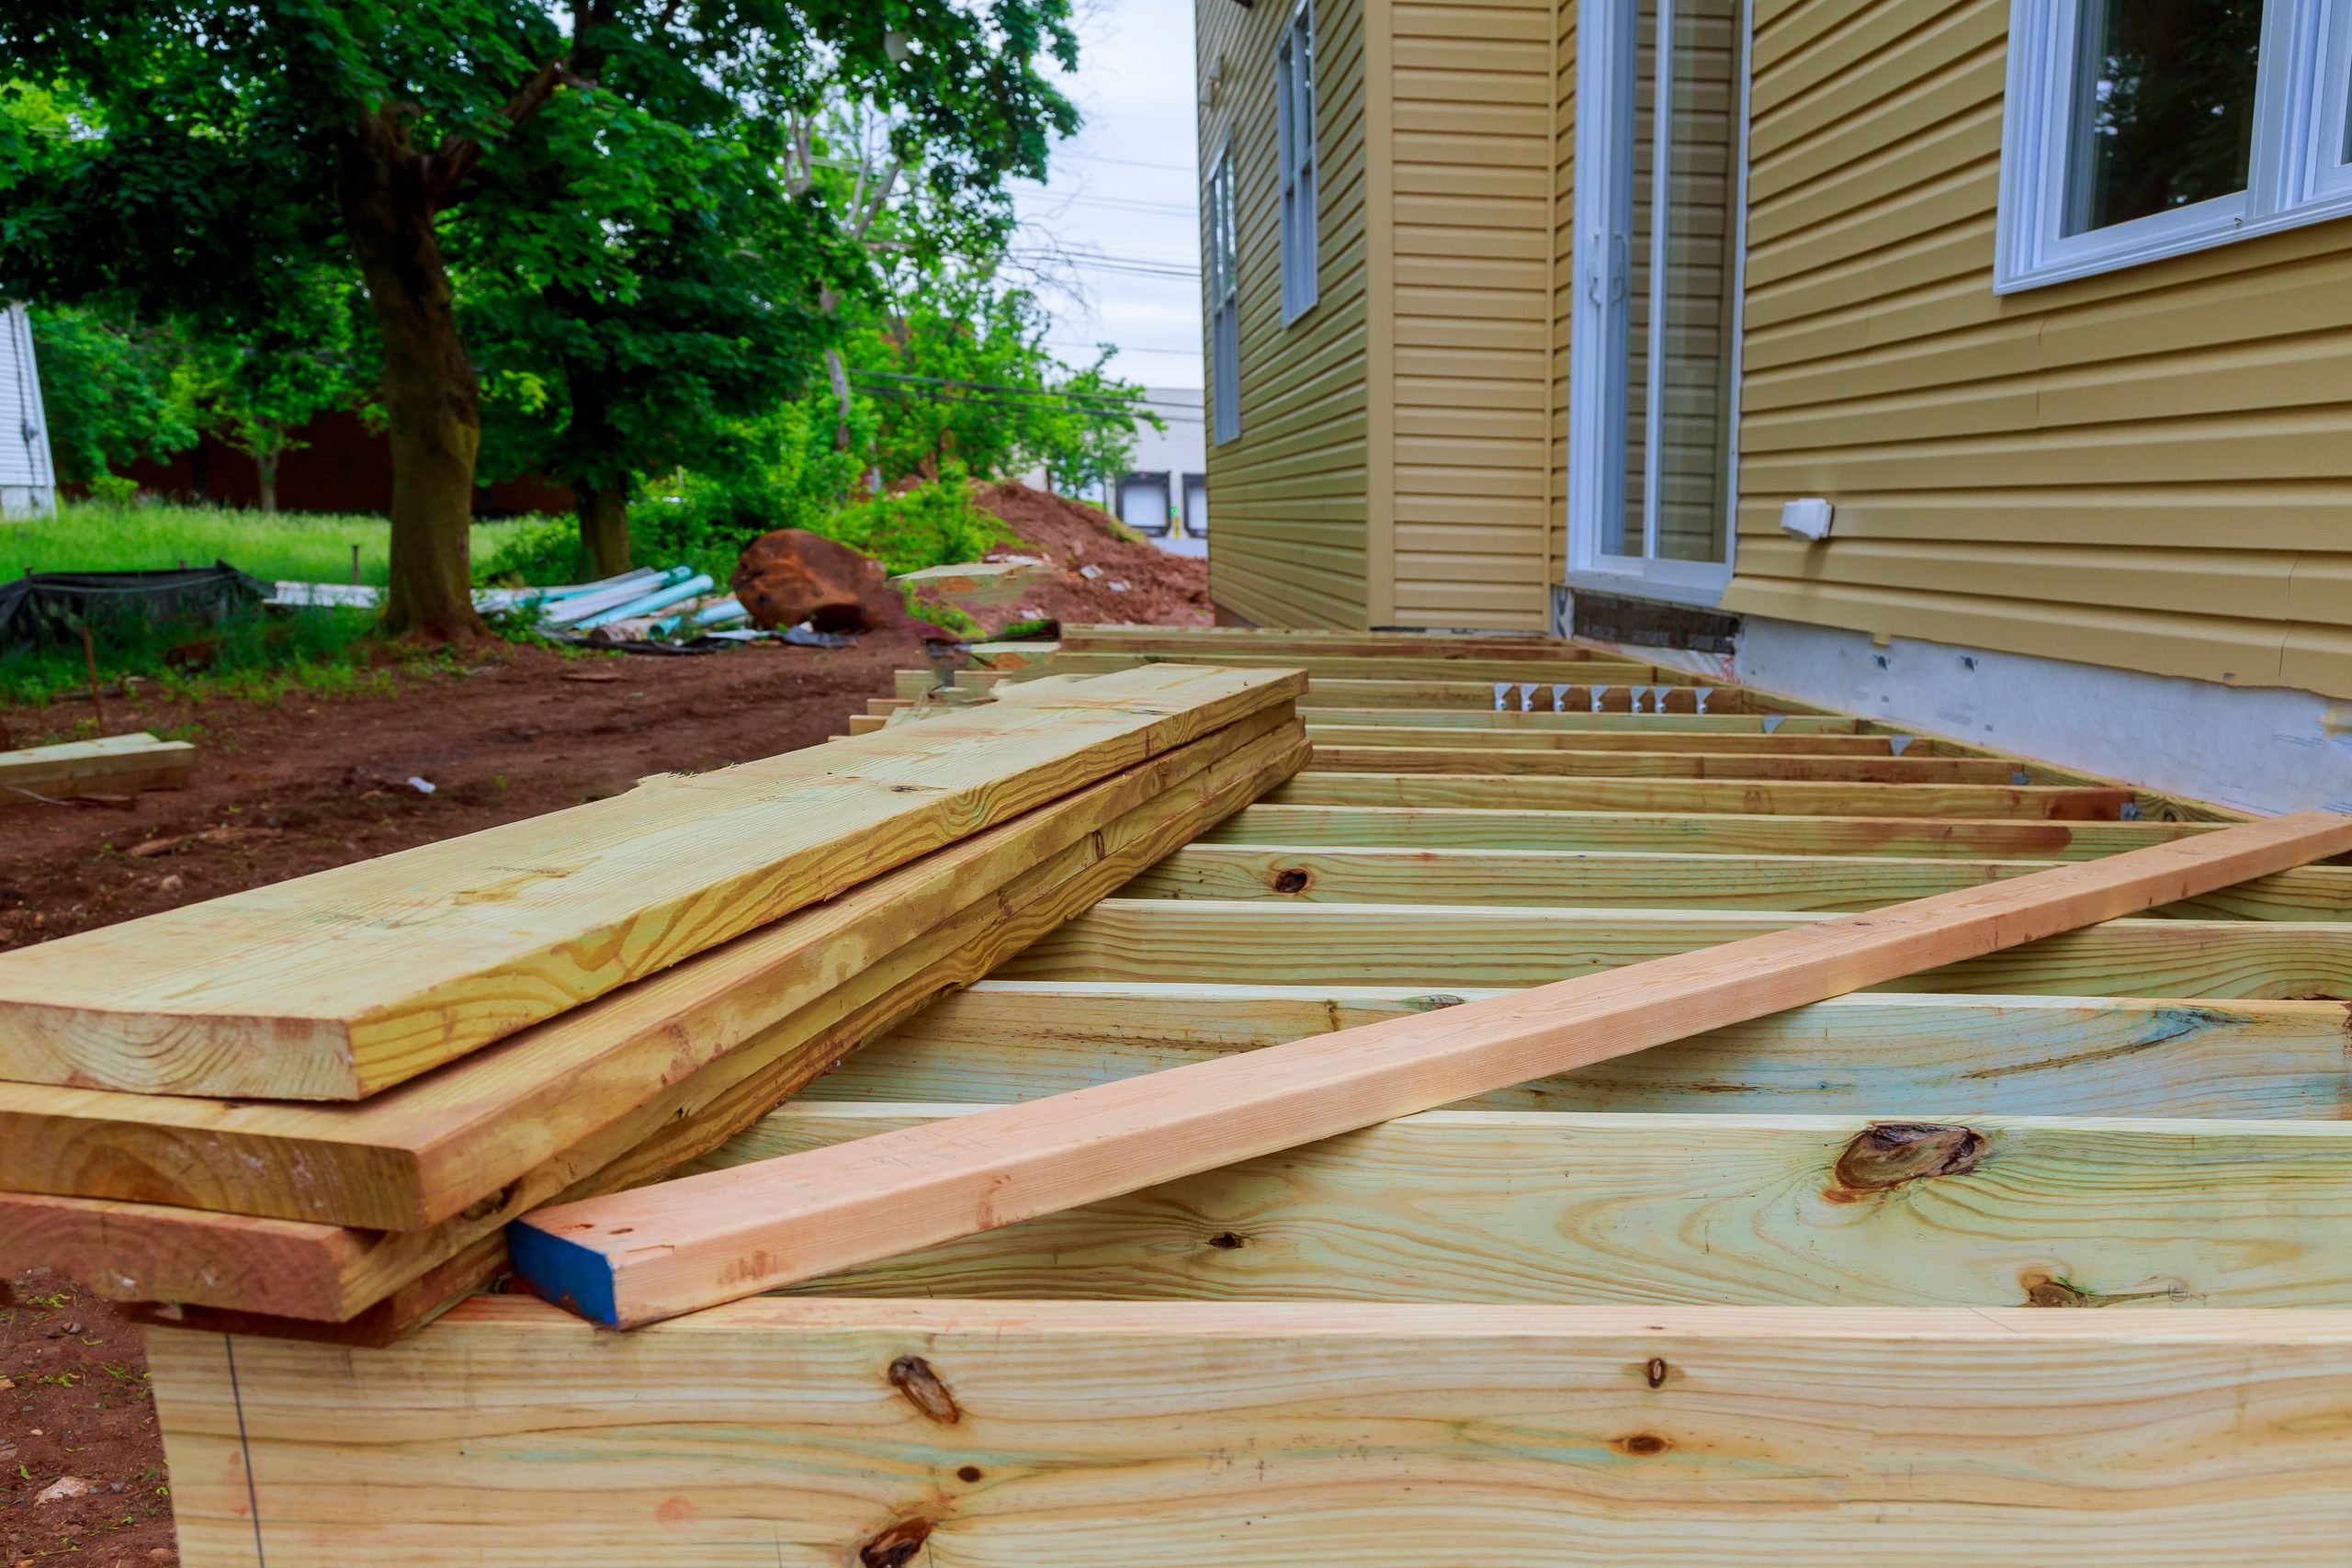 General Contractor & Home Additions Services in Greenville, DE